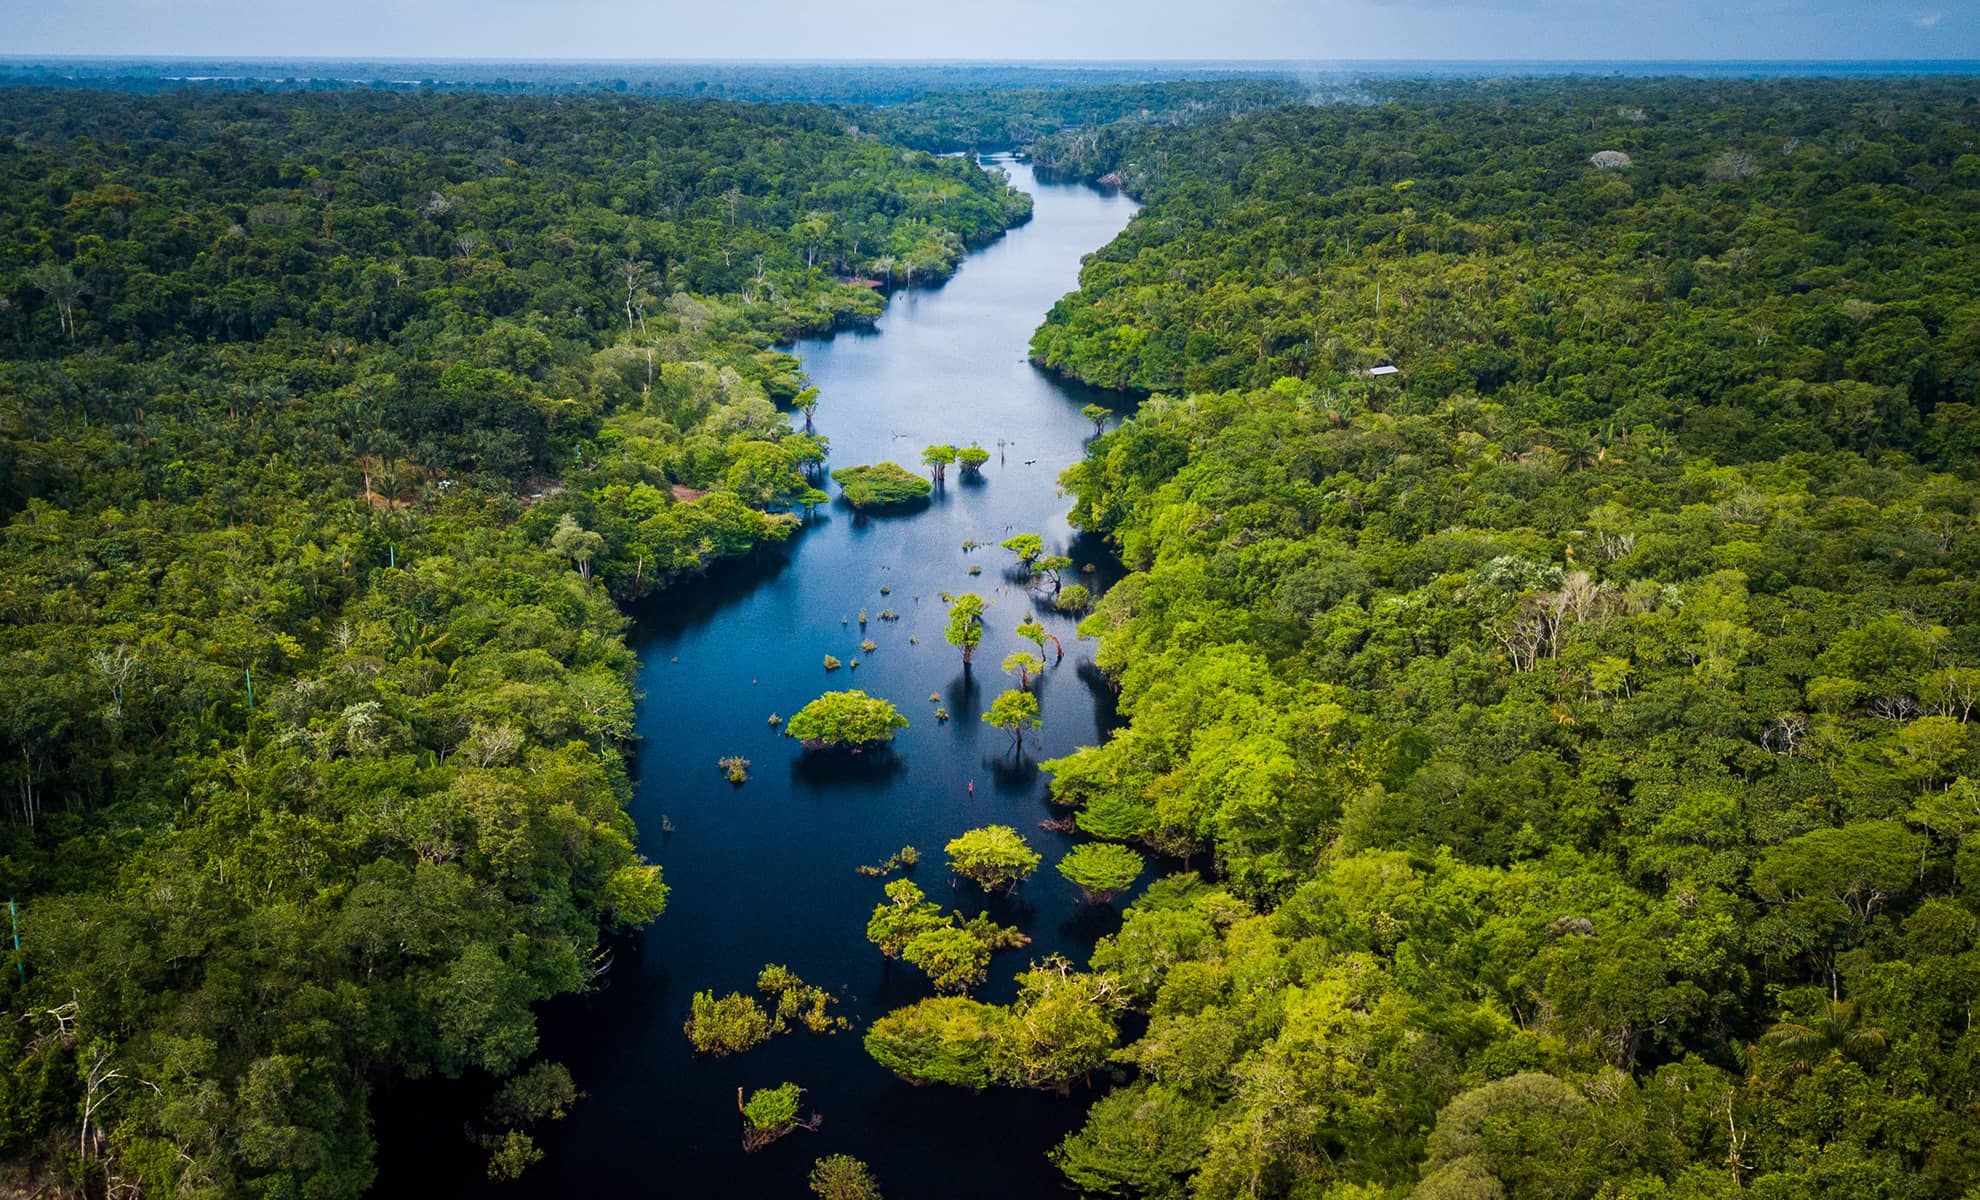 Amazon rainforest seen from above reveals the beauty of its rivers, trees and animals. Pará, Brazil